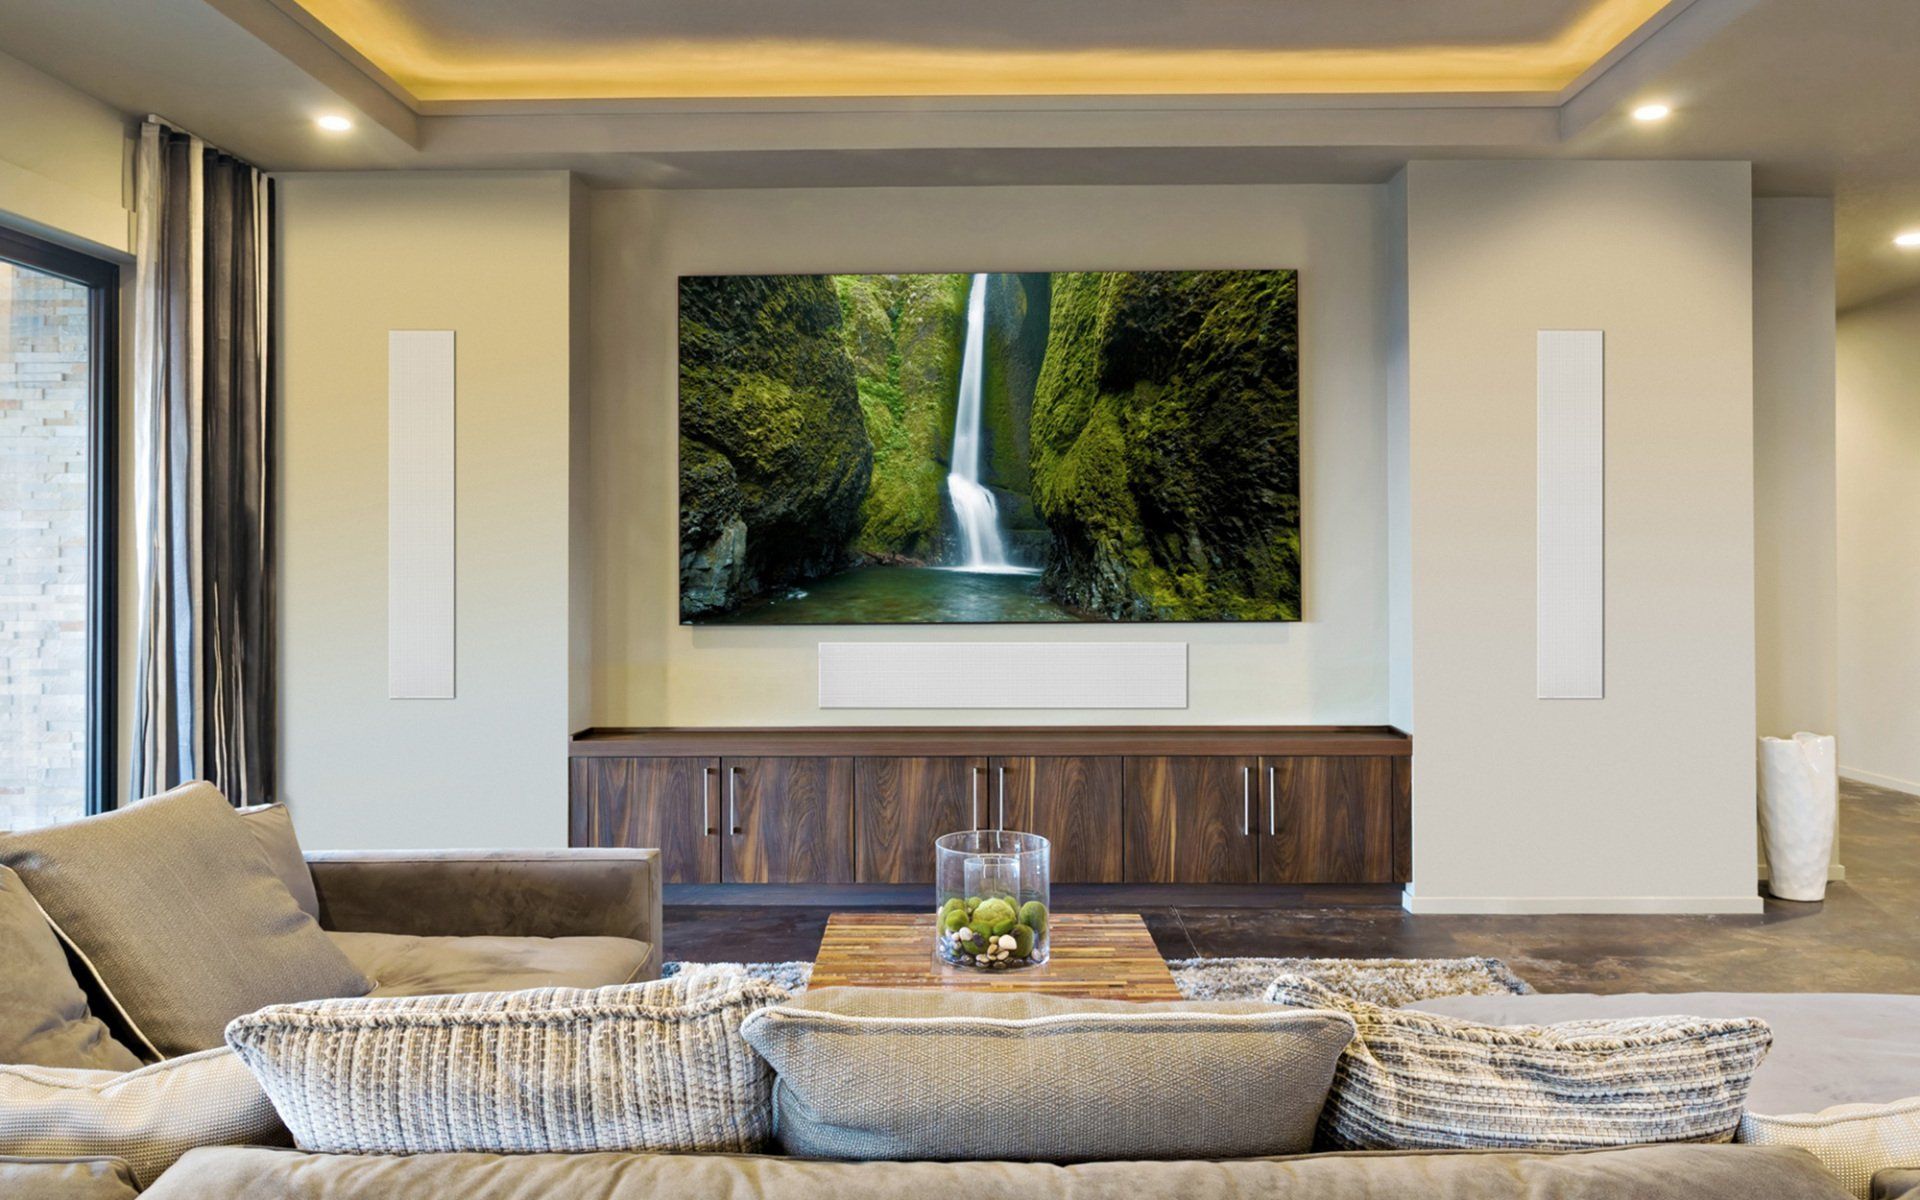 A living room with a couch , table , television and a picture of a waterfall on the wall.